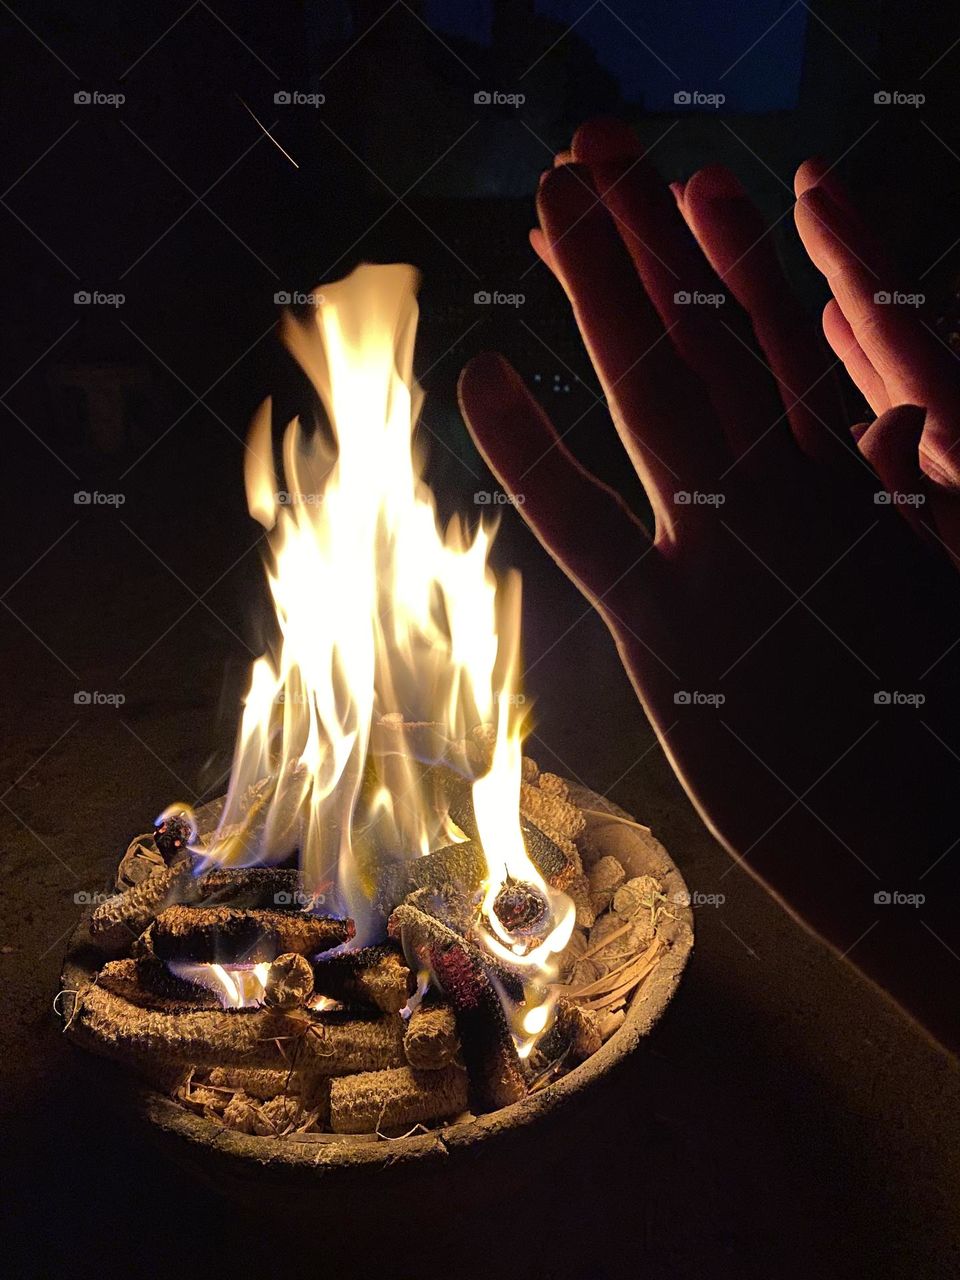 Some women are warming their hands next to a camp fire 